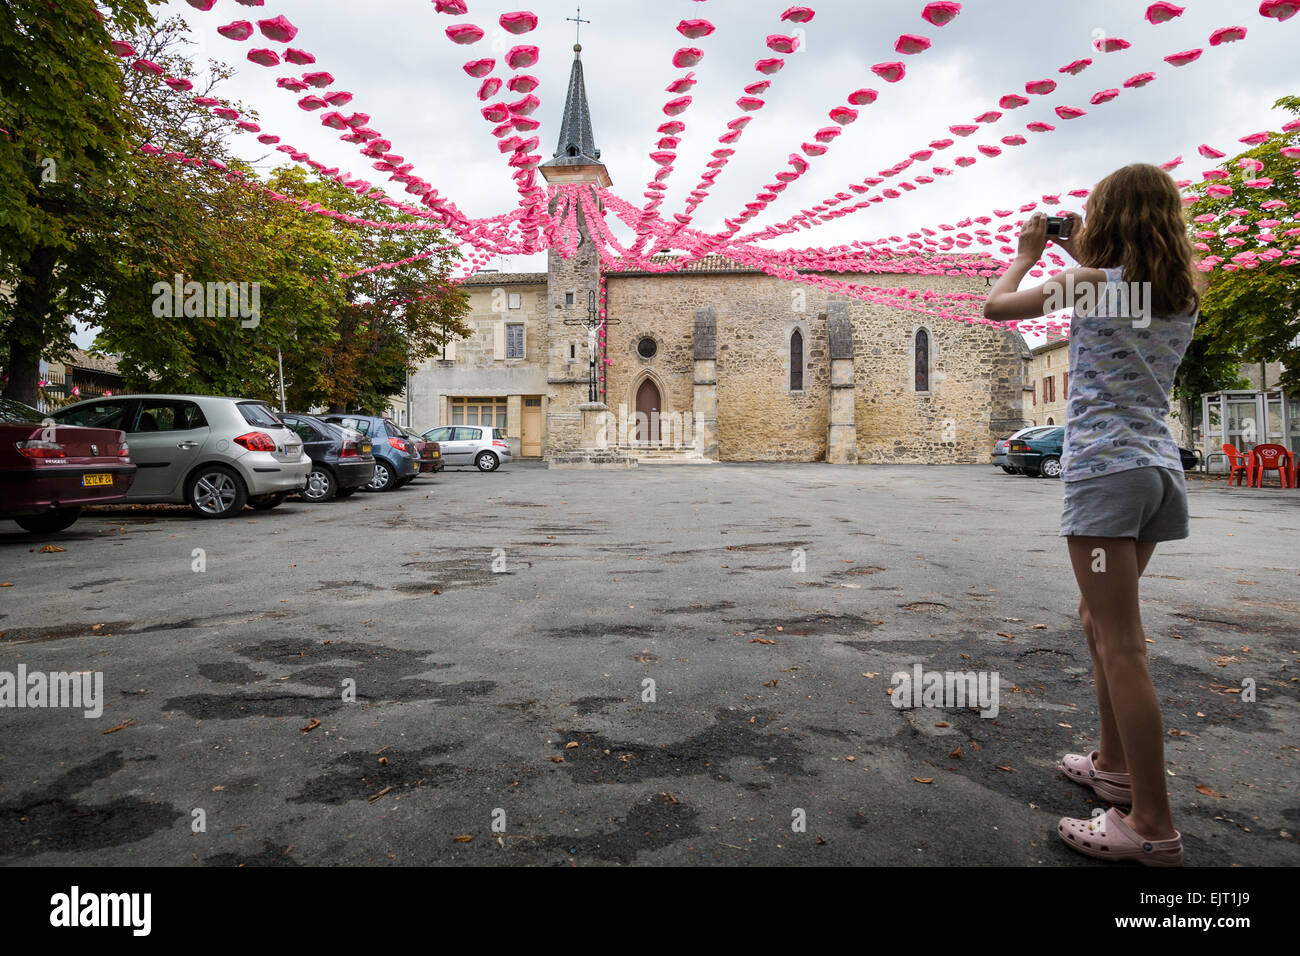 Teenage girl takes a photograph of a display of pink and white paper flowers draped across a town square Villefranche de lonchat Stock Photo